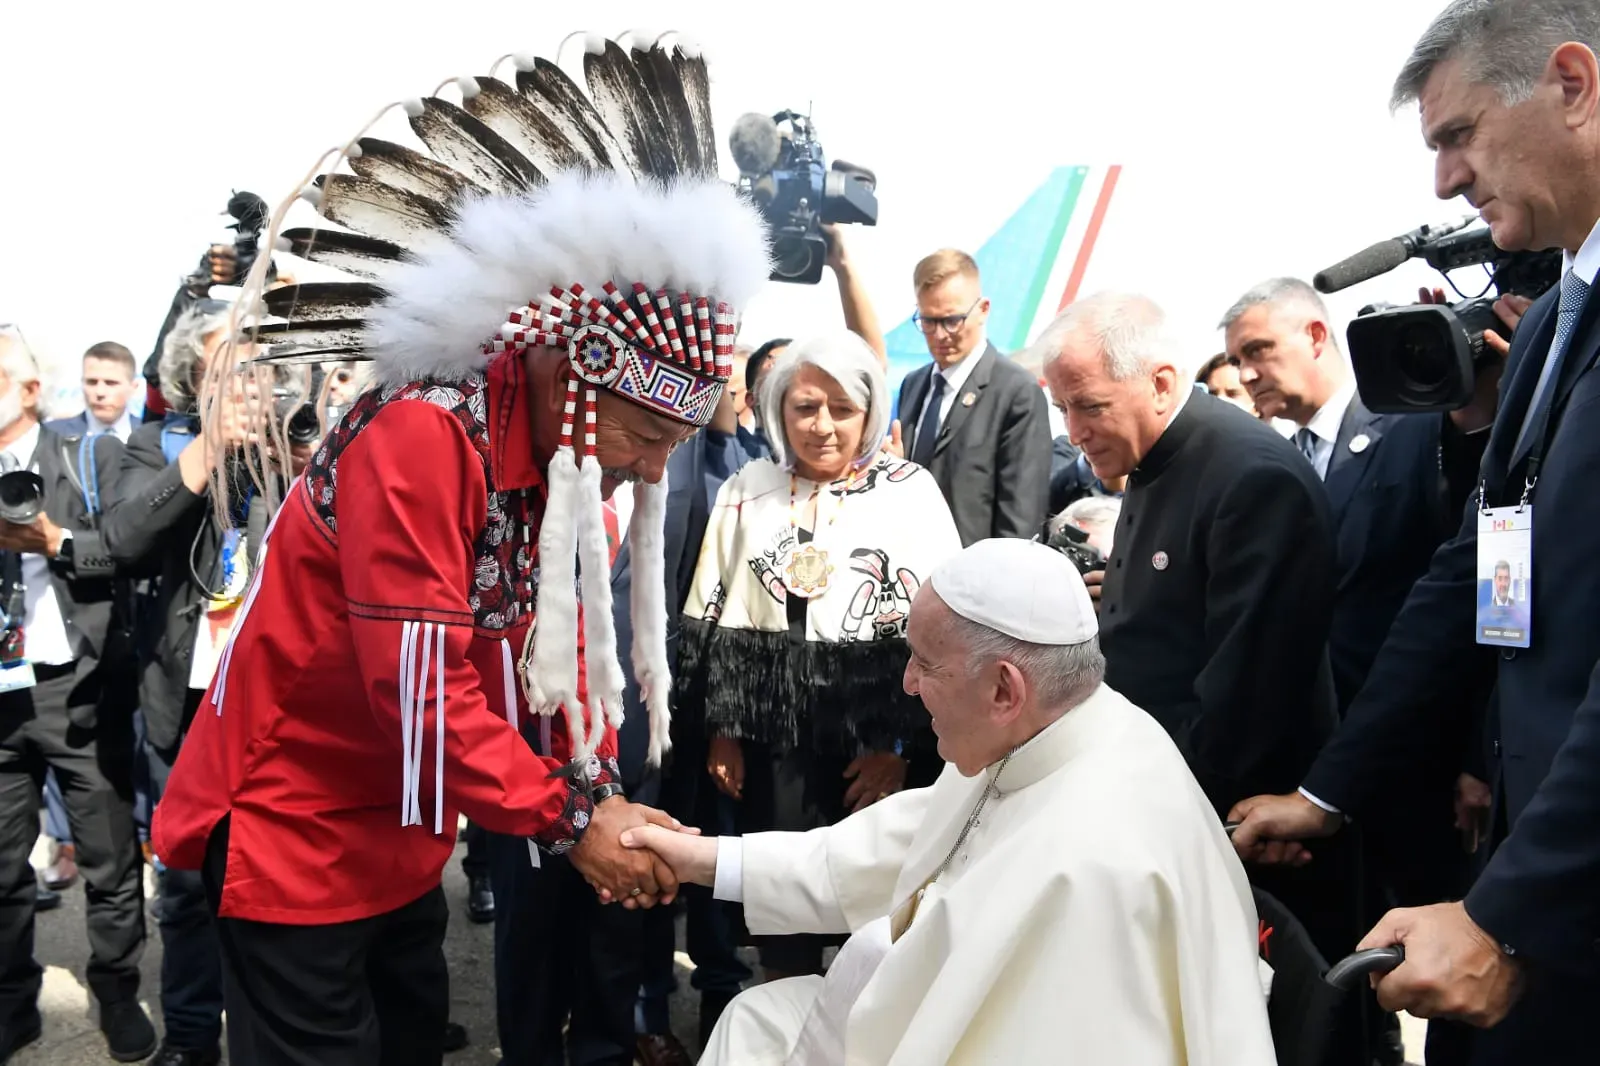 Pope Francis in Canada for a Six-day Cross-country Visit: Photos